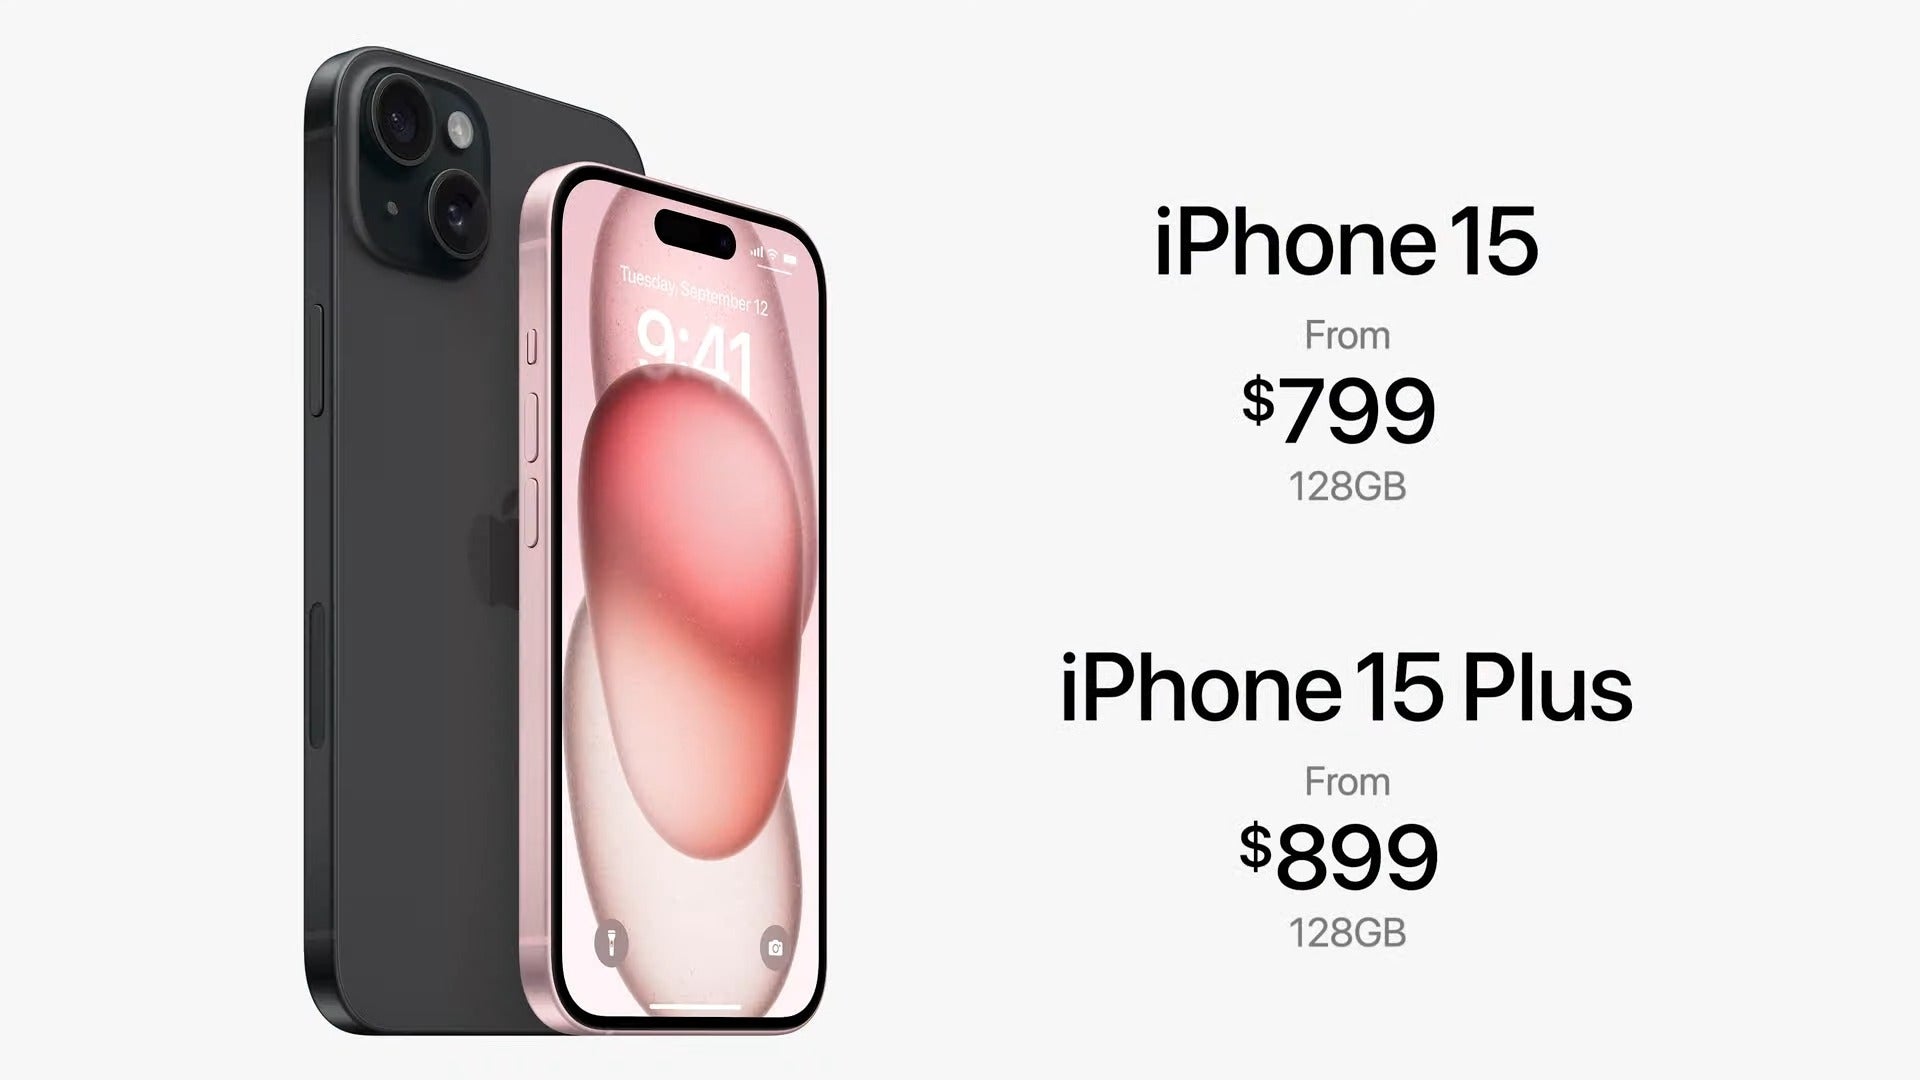 Apple iPhone 15 and iPhone 15 Plus prices - Apple iPhone 15 and 15 Plus land with old price, new USB-C, and 14 Pro features